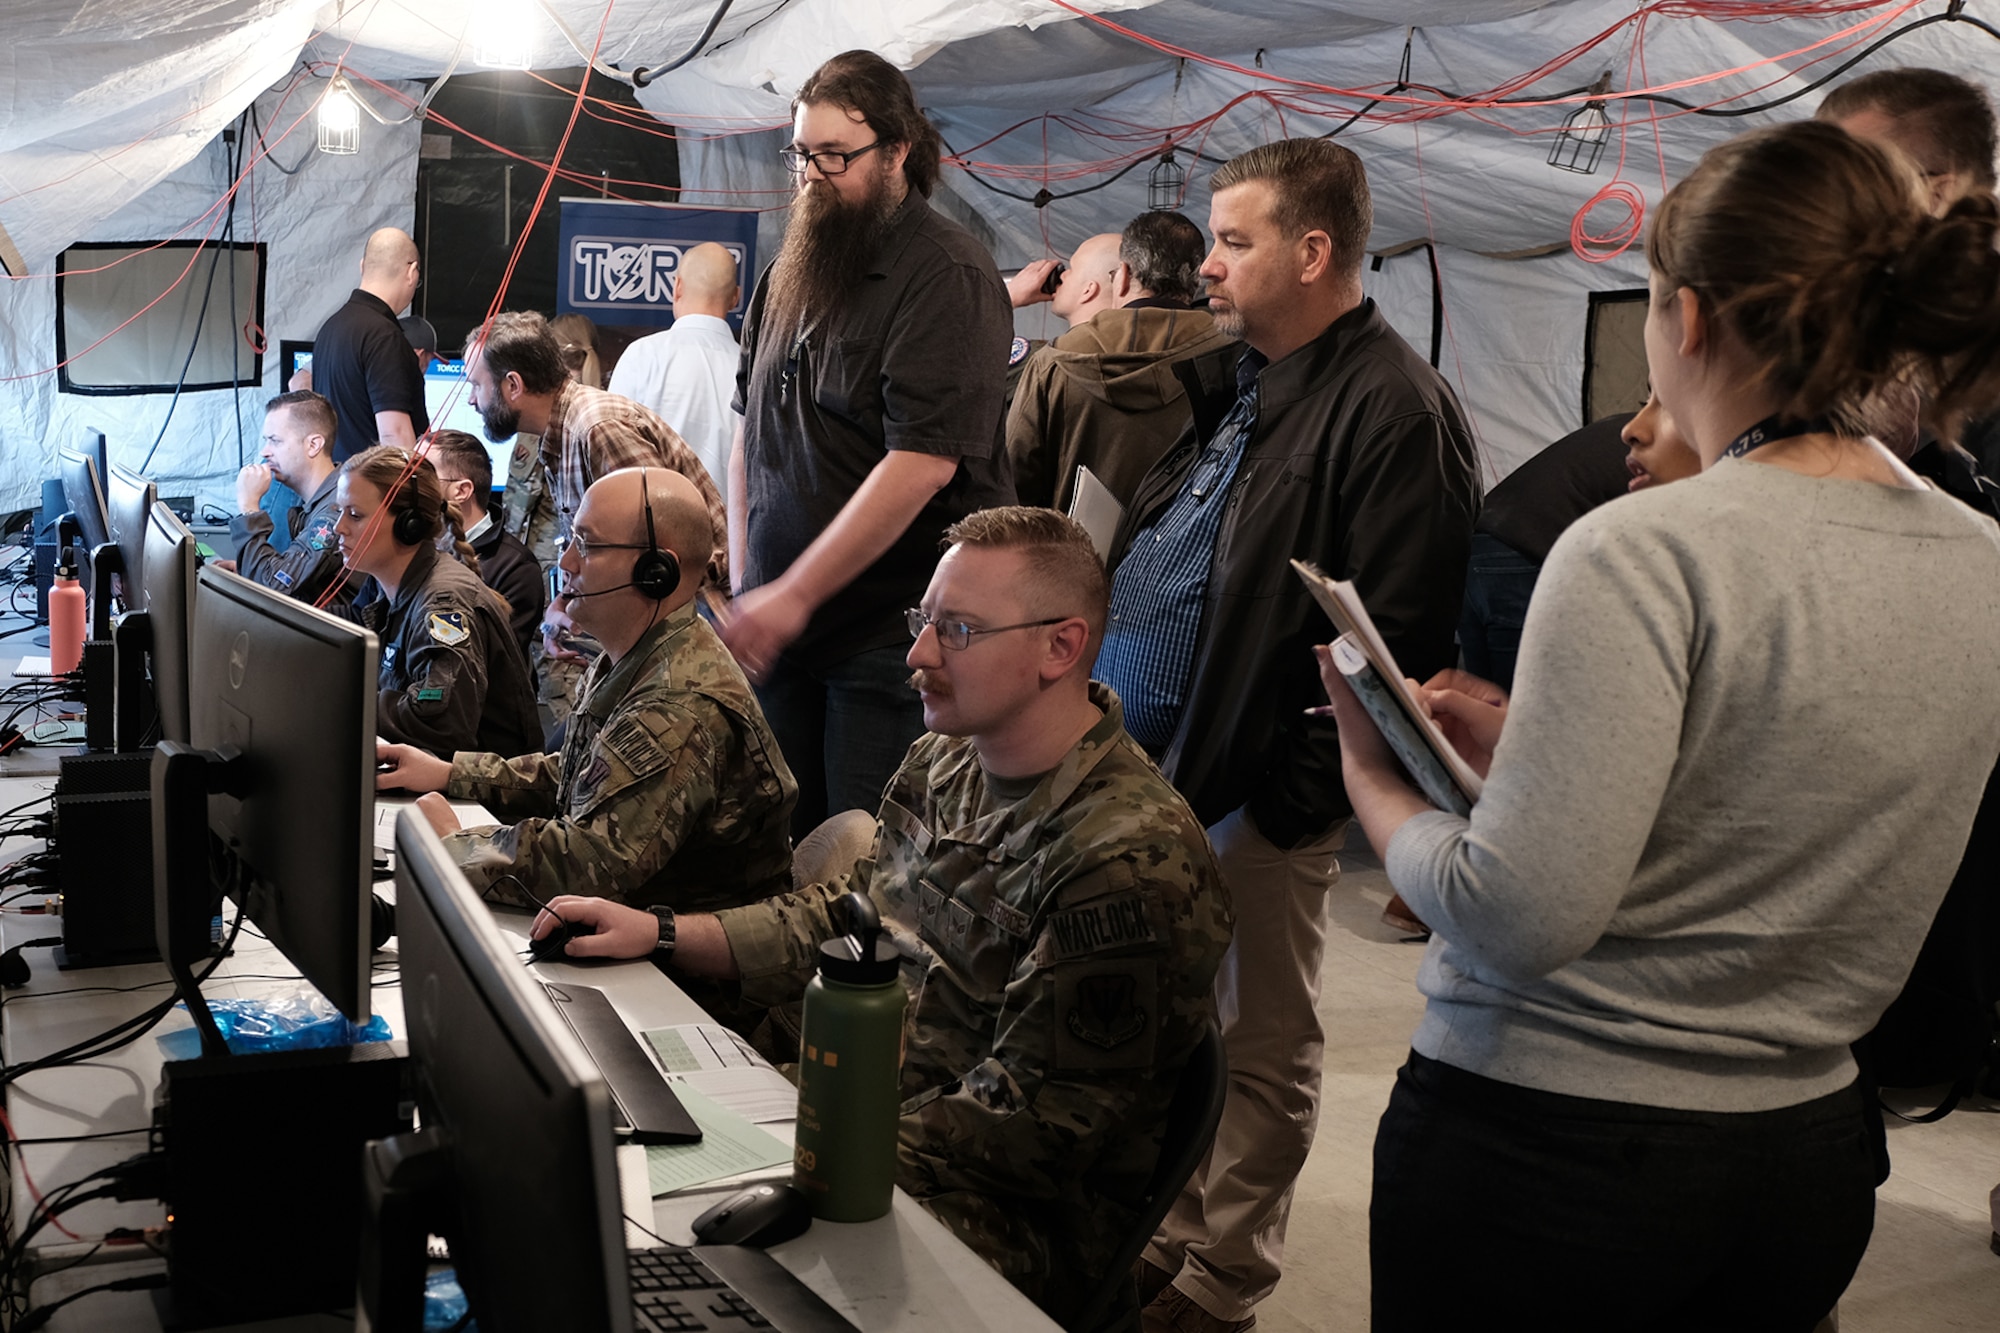 photo of U.S. Air Force military members work on computers in a tent while civilians stand and watch